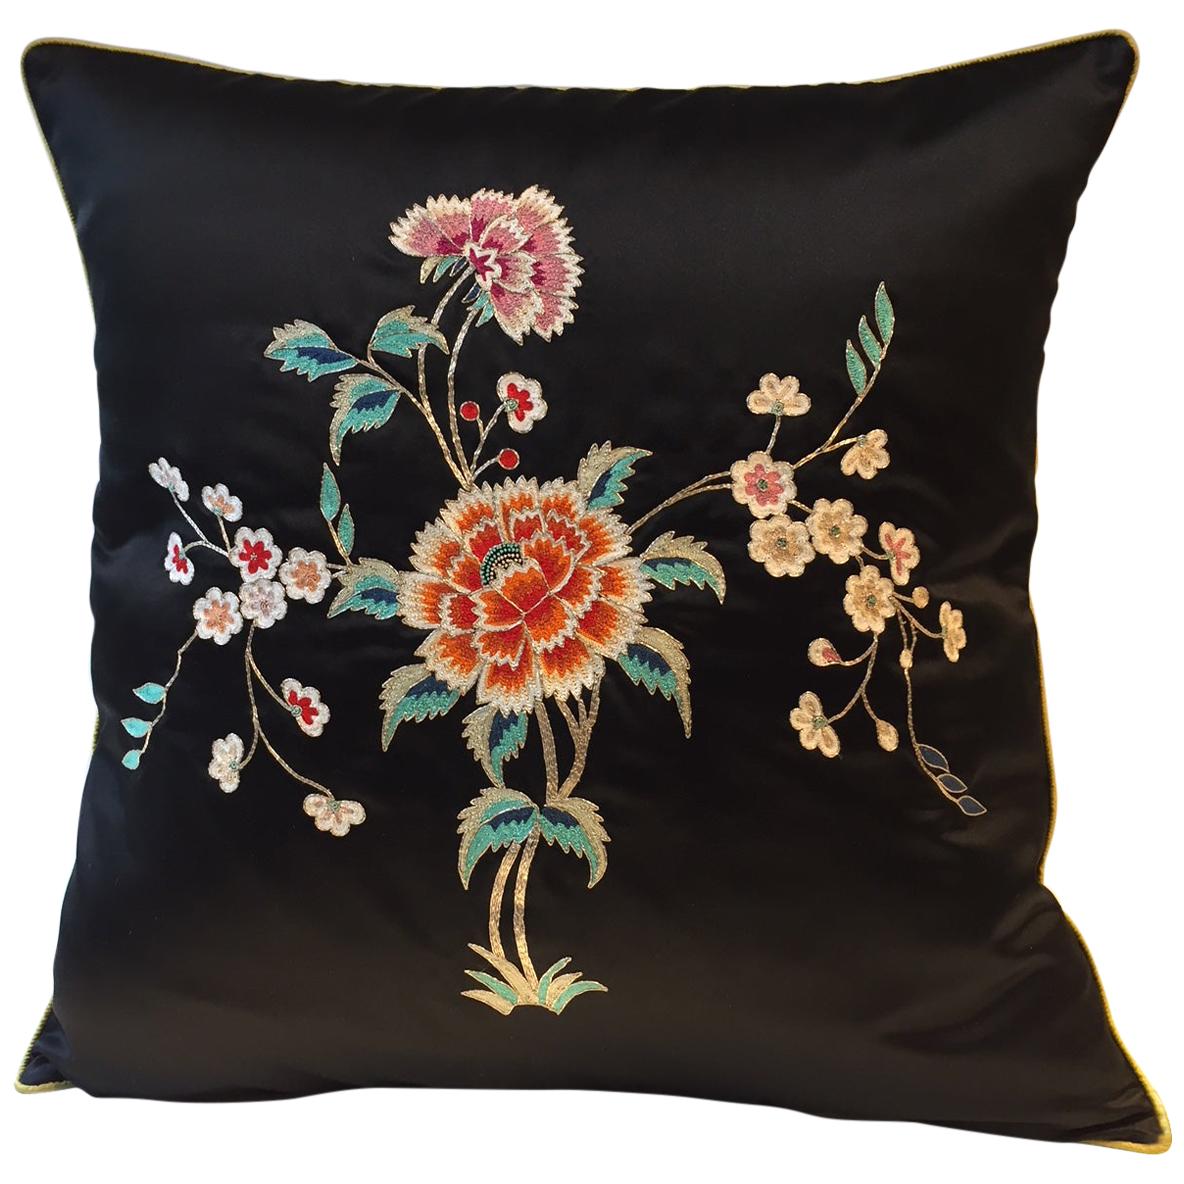 Decorative Cushion Silk Black with Chinese Inspired Floral Hand Embroidery